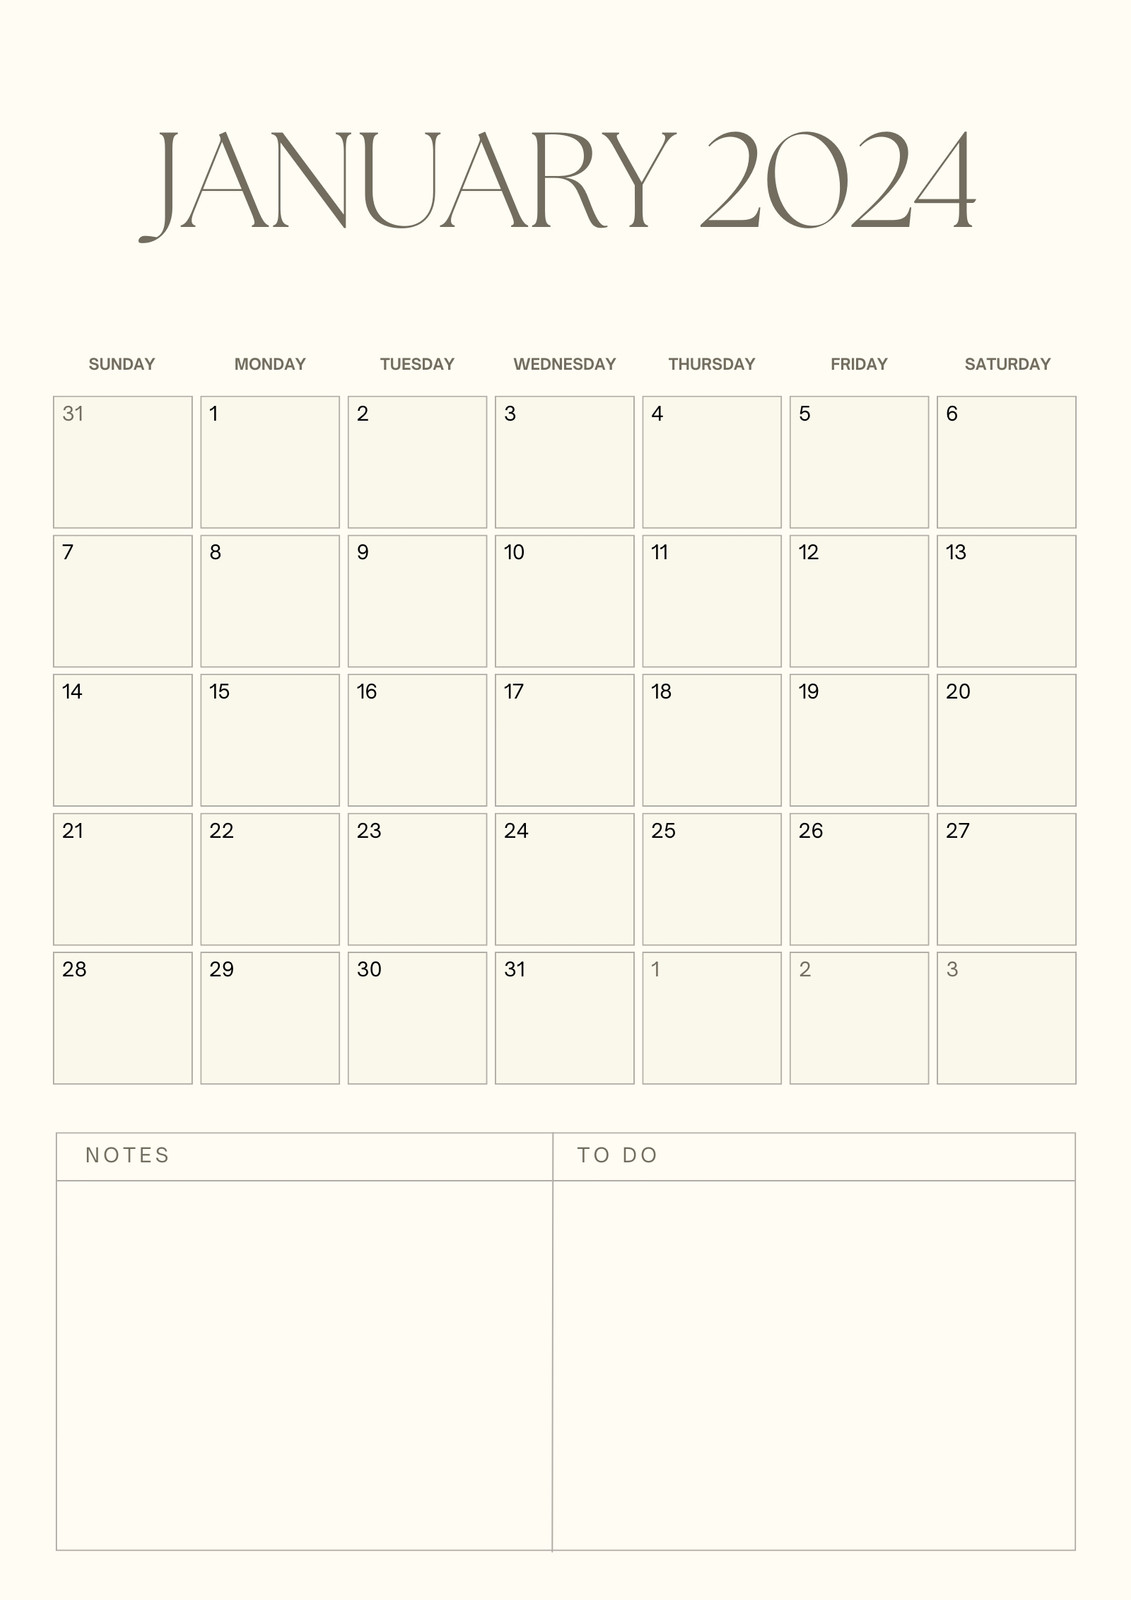 Calendar Template For 2025 Year. Planner Diary In A Minimalist